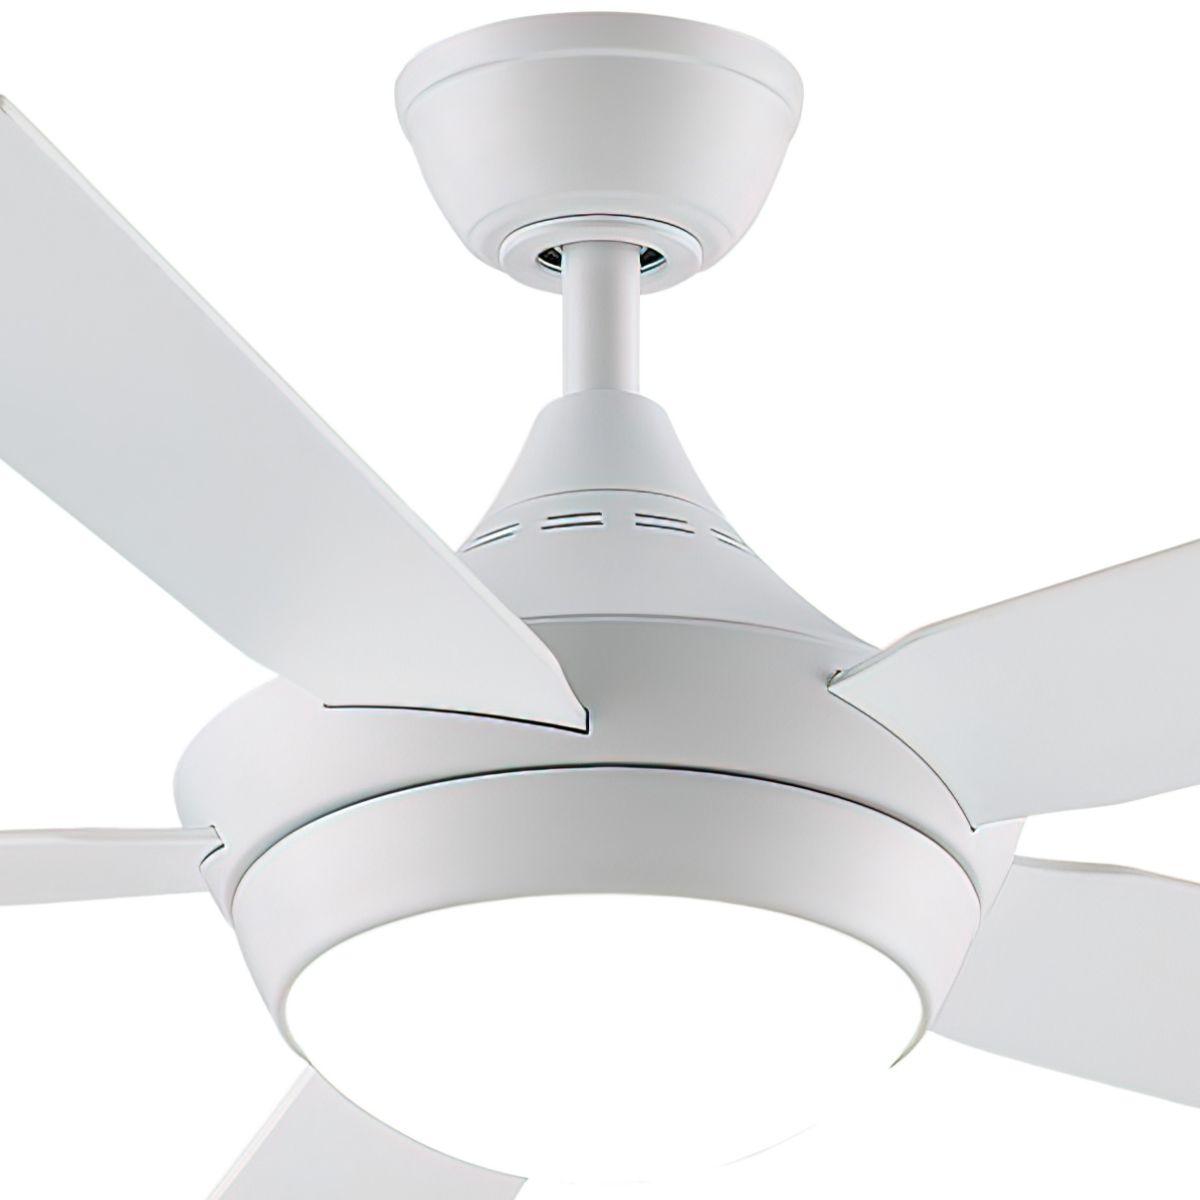 Celano 52 Inch Modern Ceiling Fan With Light And Remote, Opal Frosted Glass